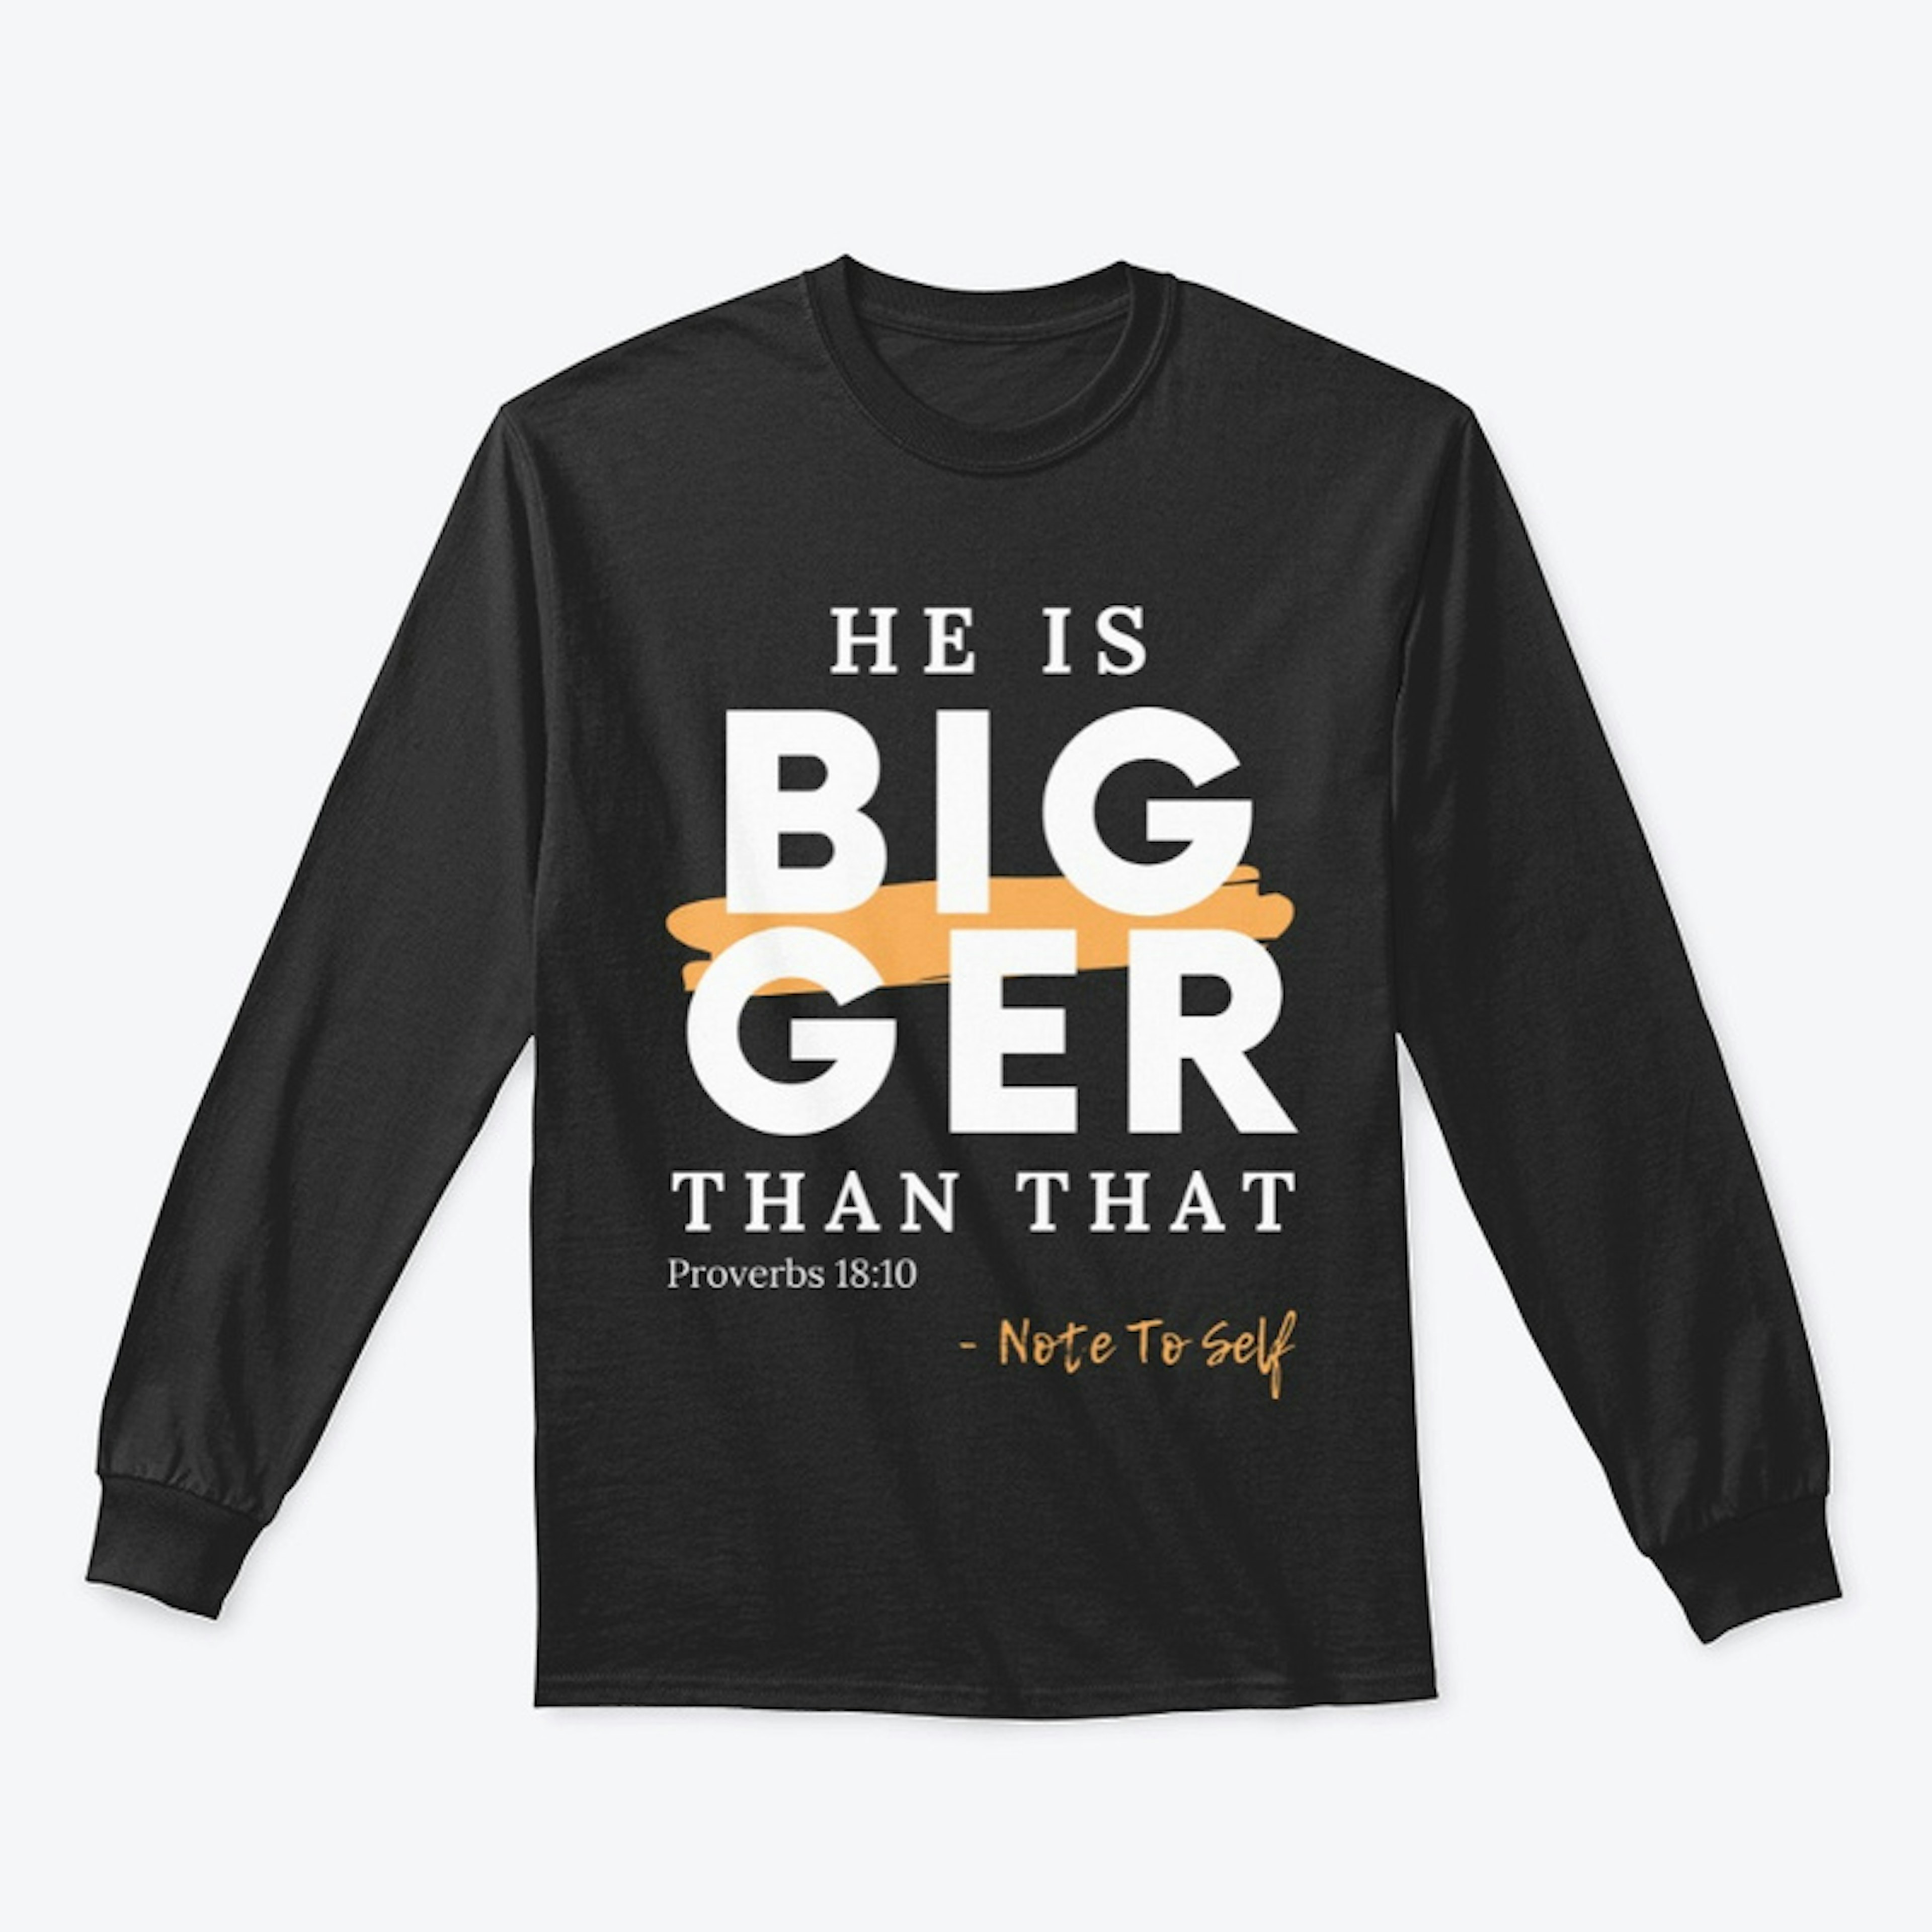 He is Bigger Than That - Proverbs 18:10